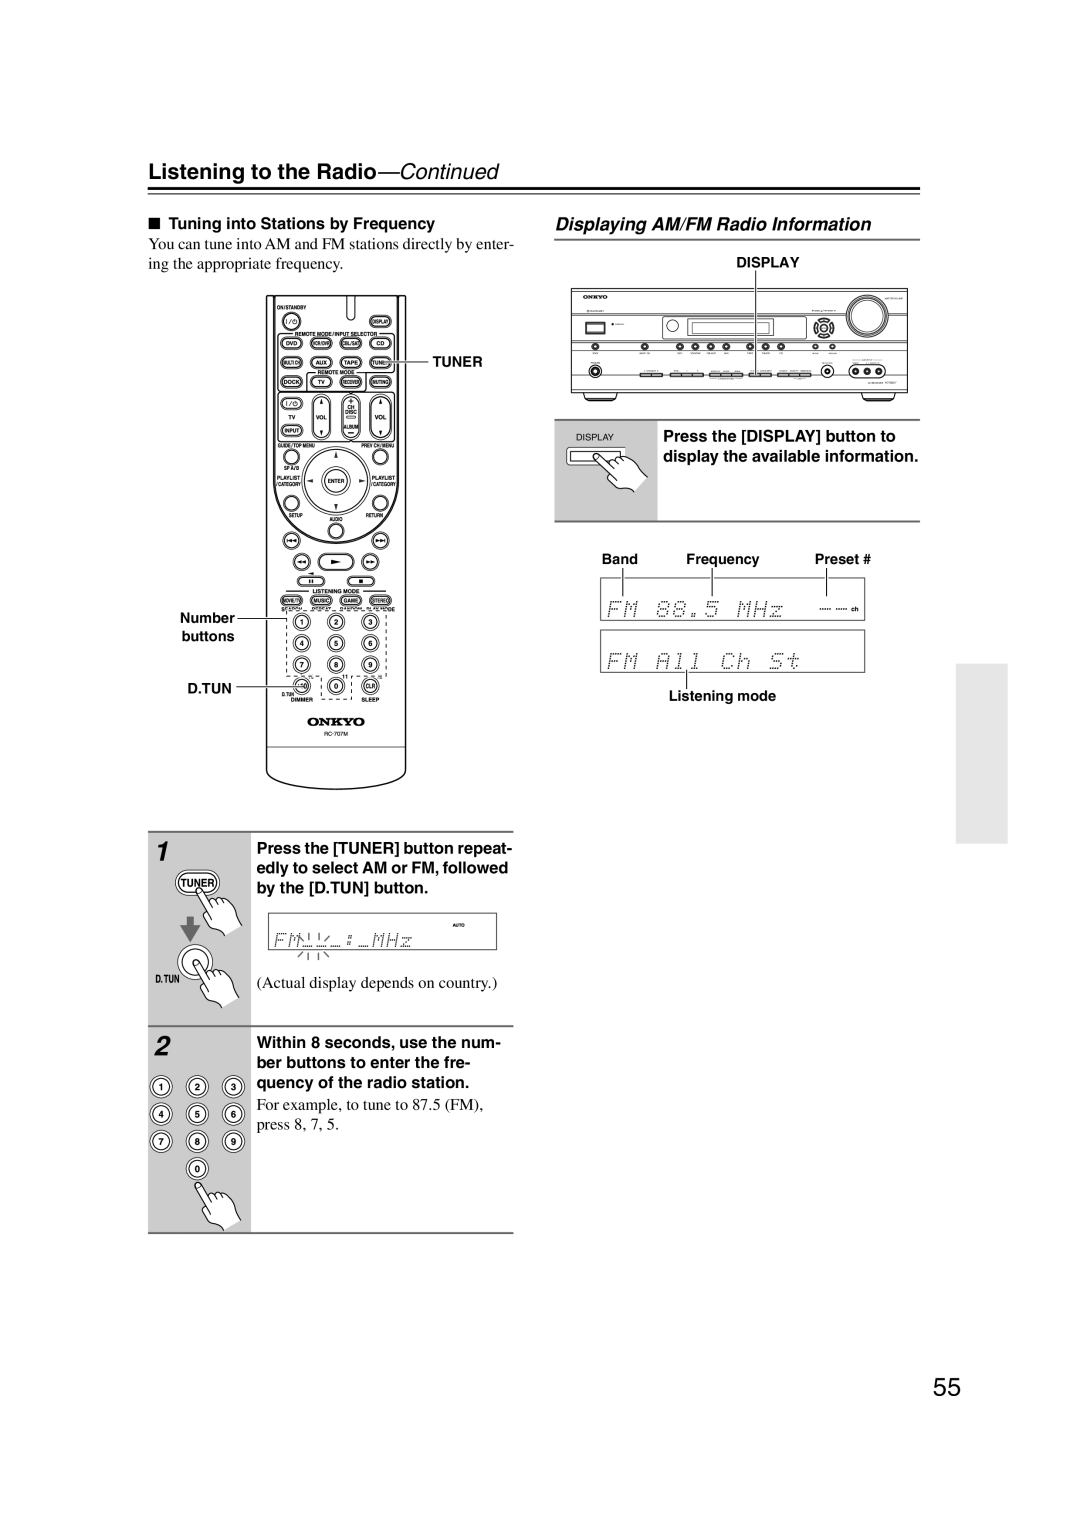 Onkyo HT-S6100 instruction manual Listening to the Radio-Continued, Displaying AM/FM Radio Information 